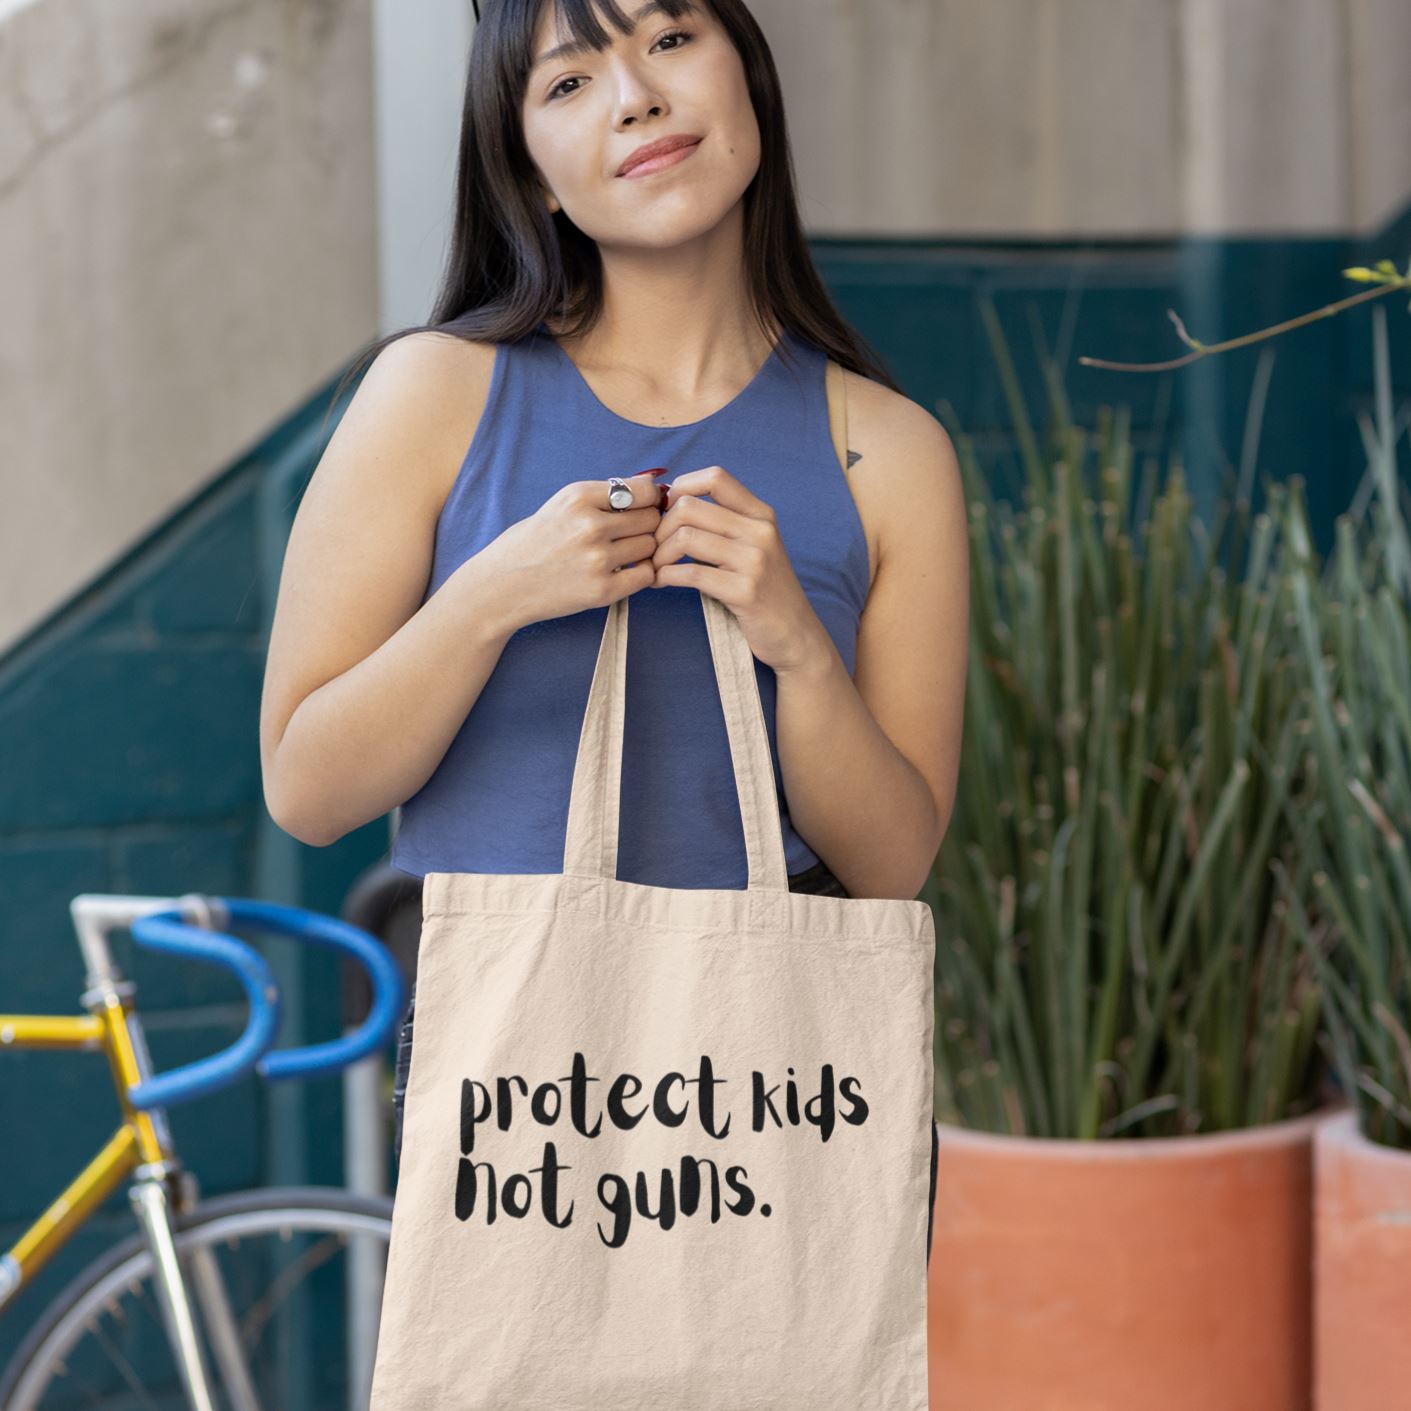 Protect Kids Not Guns | Tote Bag by The Happy Givers